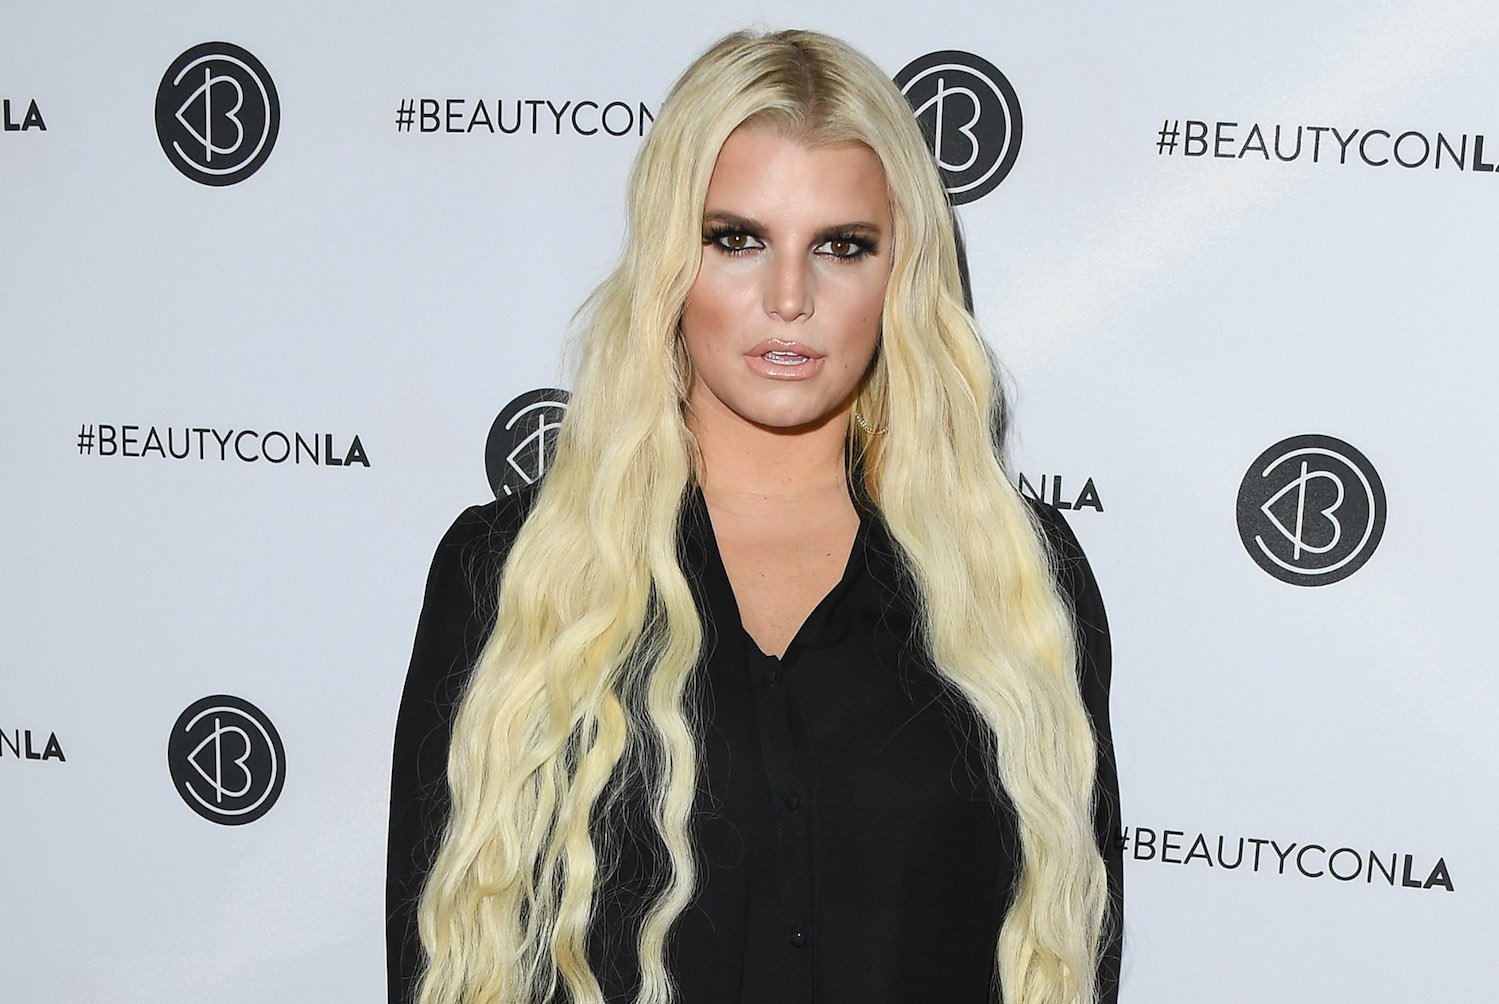 People on social media are hating on Jessica Simpson's choice of name ...